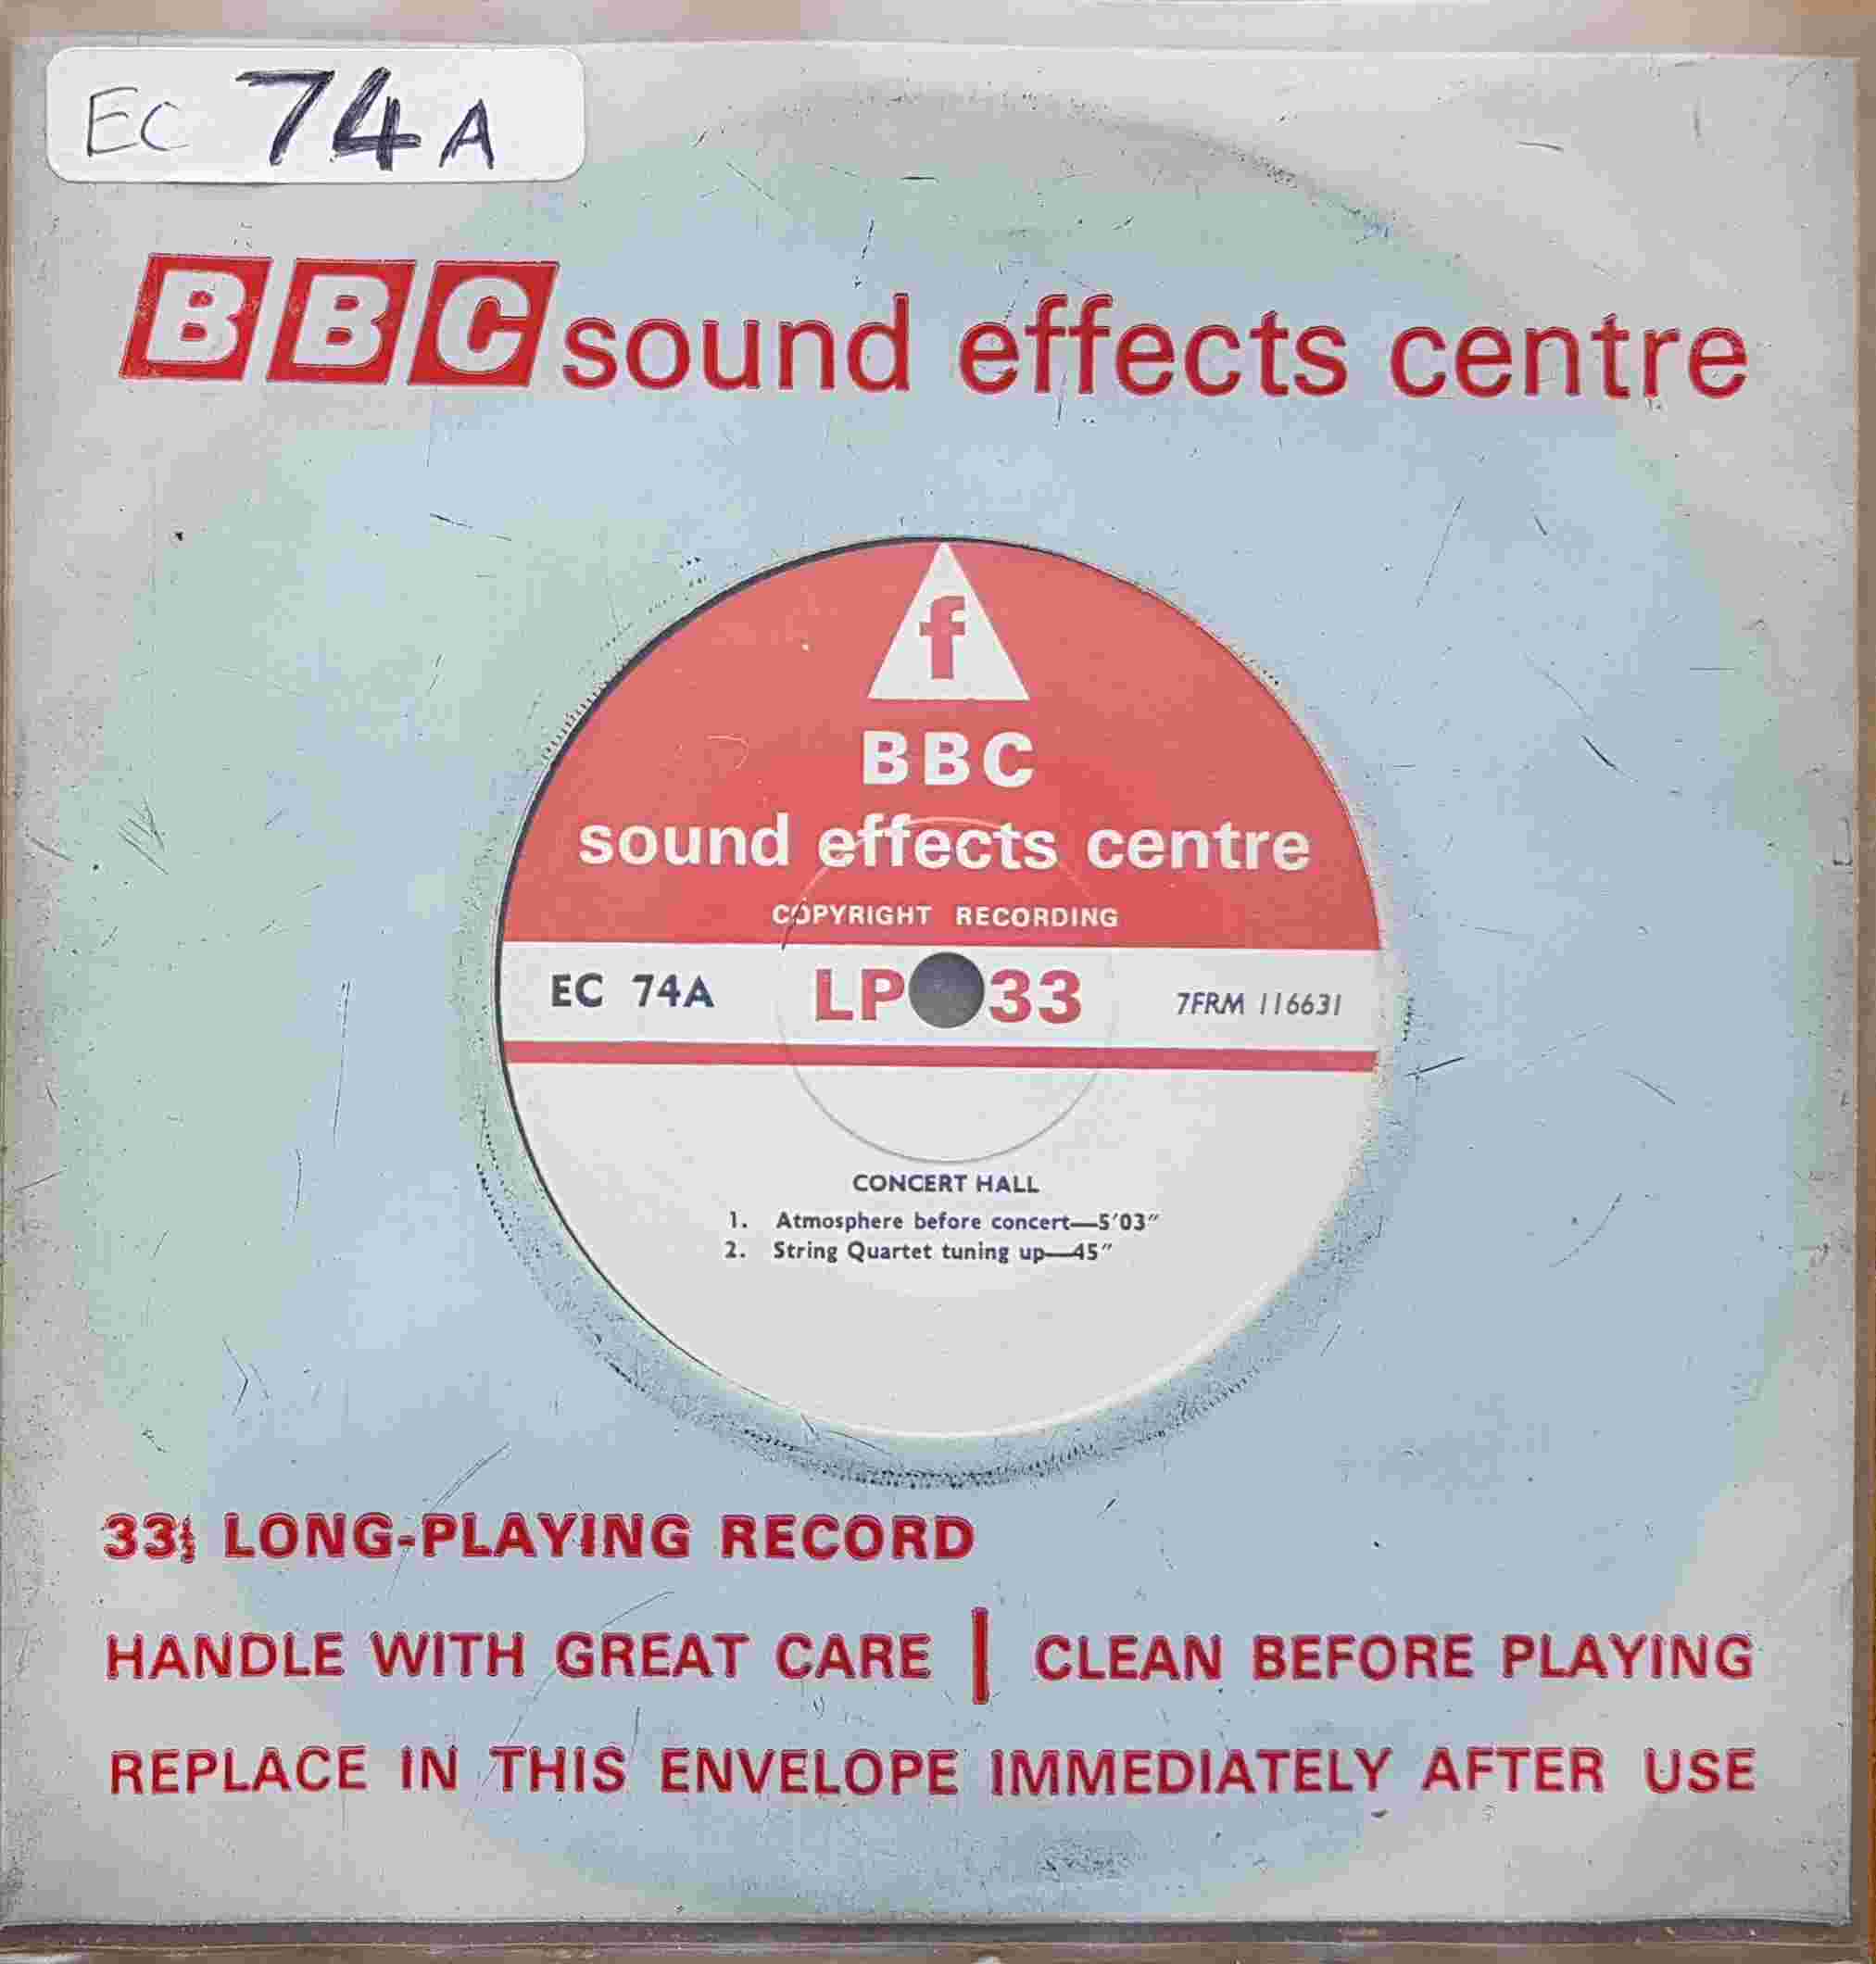 Picture of EC 74A Concert hall by artist Not registered from the BBC singles - Records and Tapes library